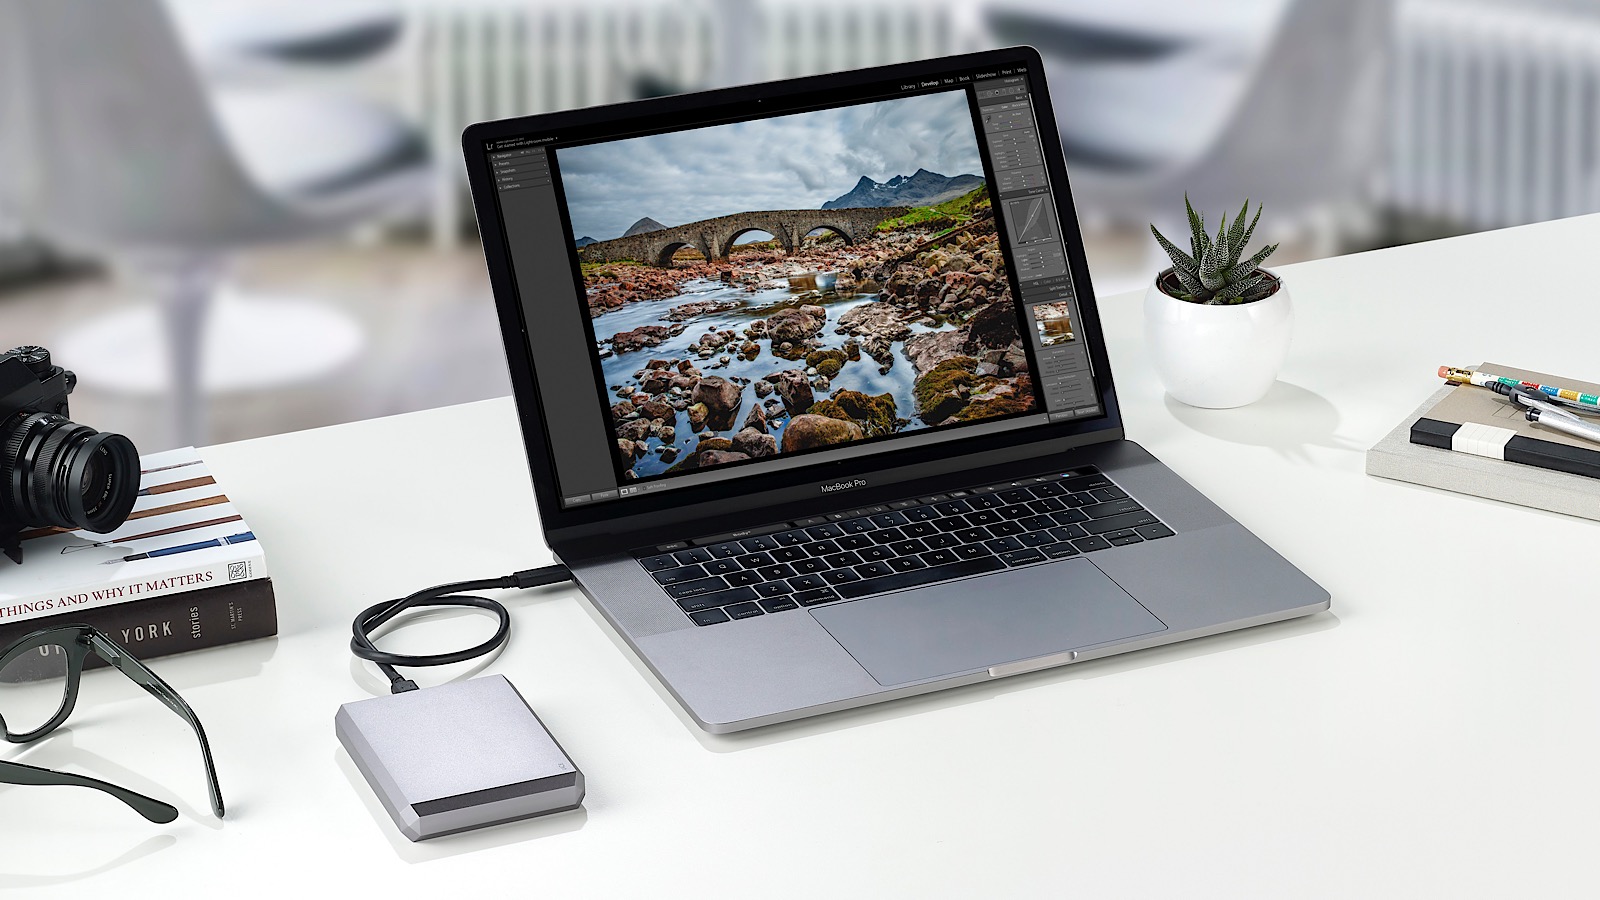 LaCie's external drives for 2019, launched at CES 2019